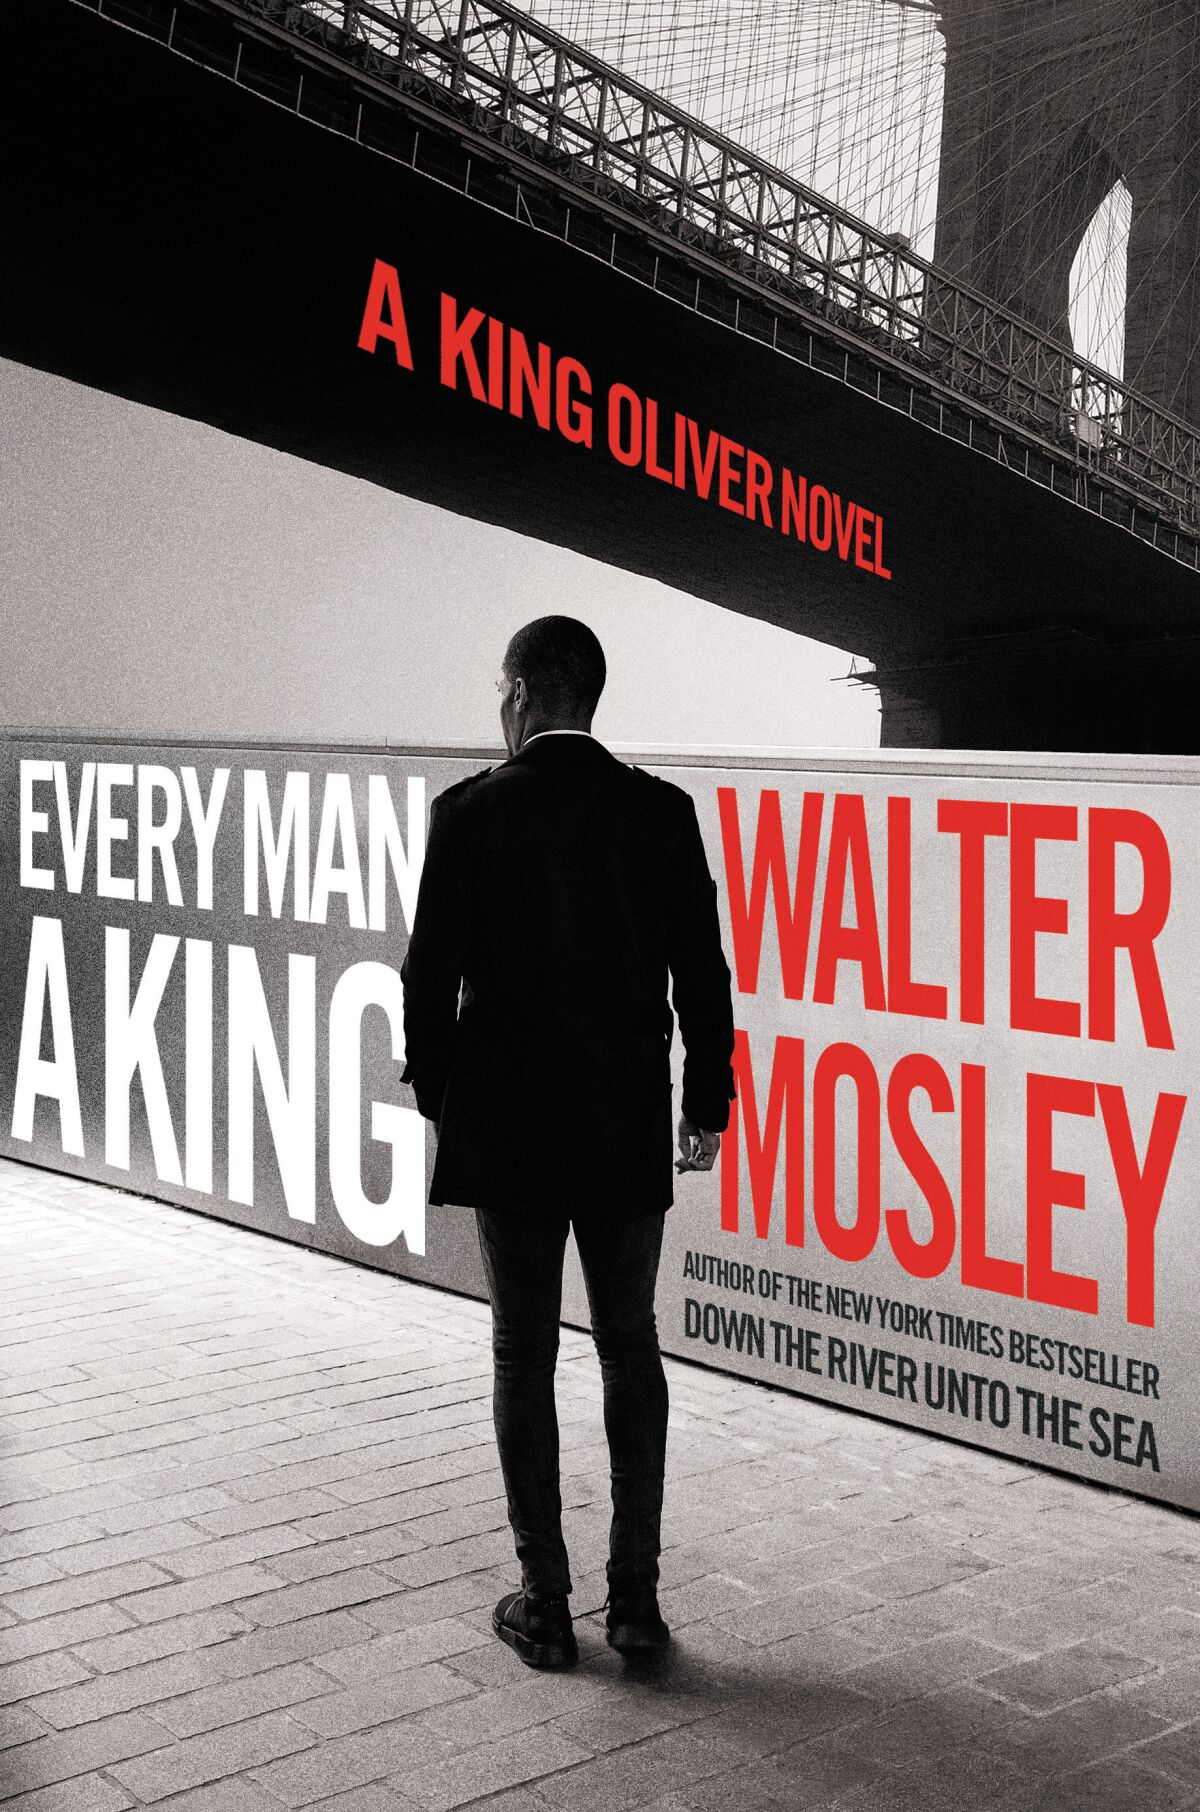 "Every Man a King," by Walter Mosley